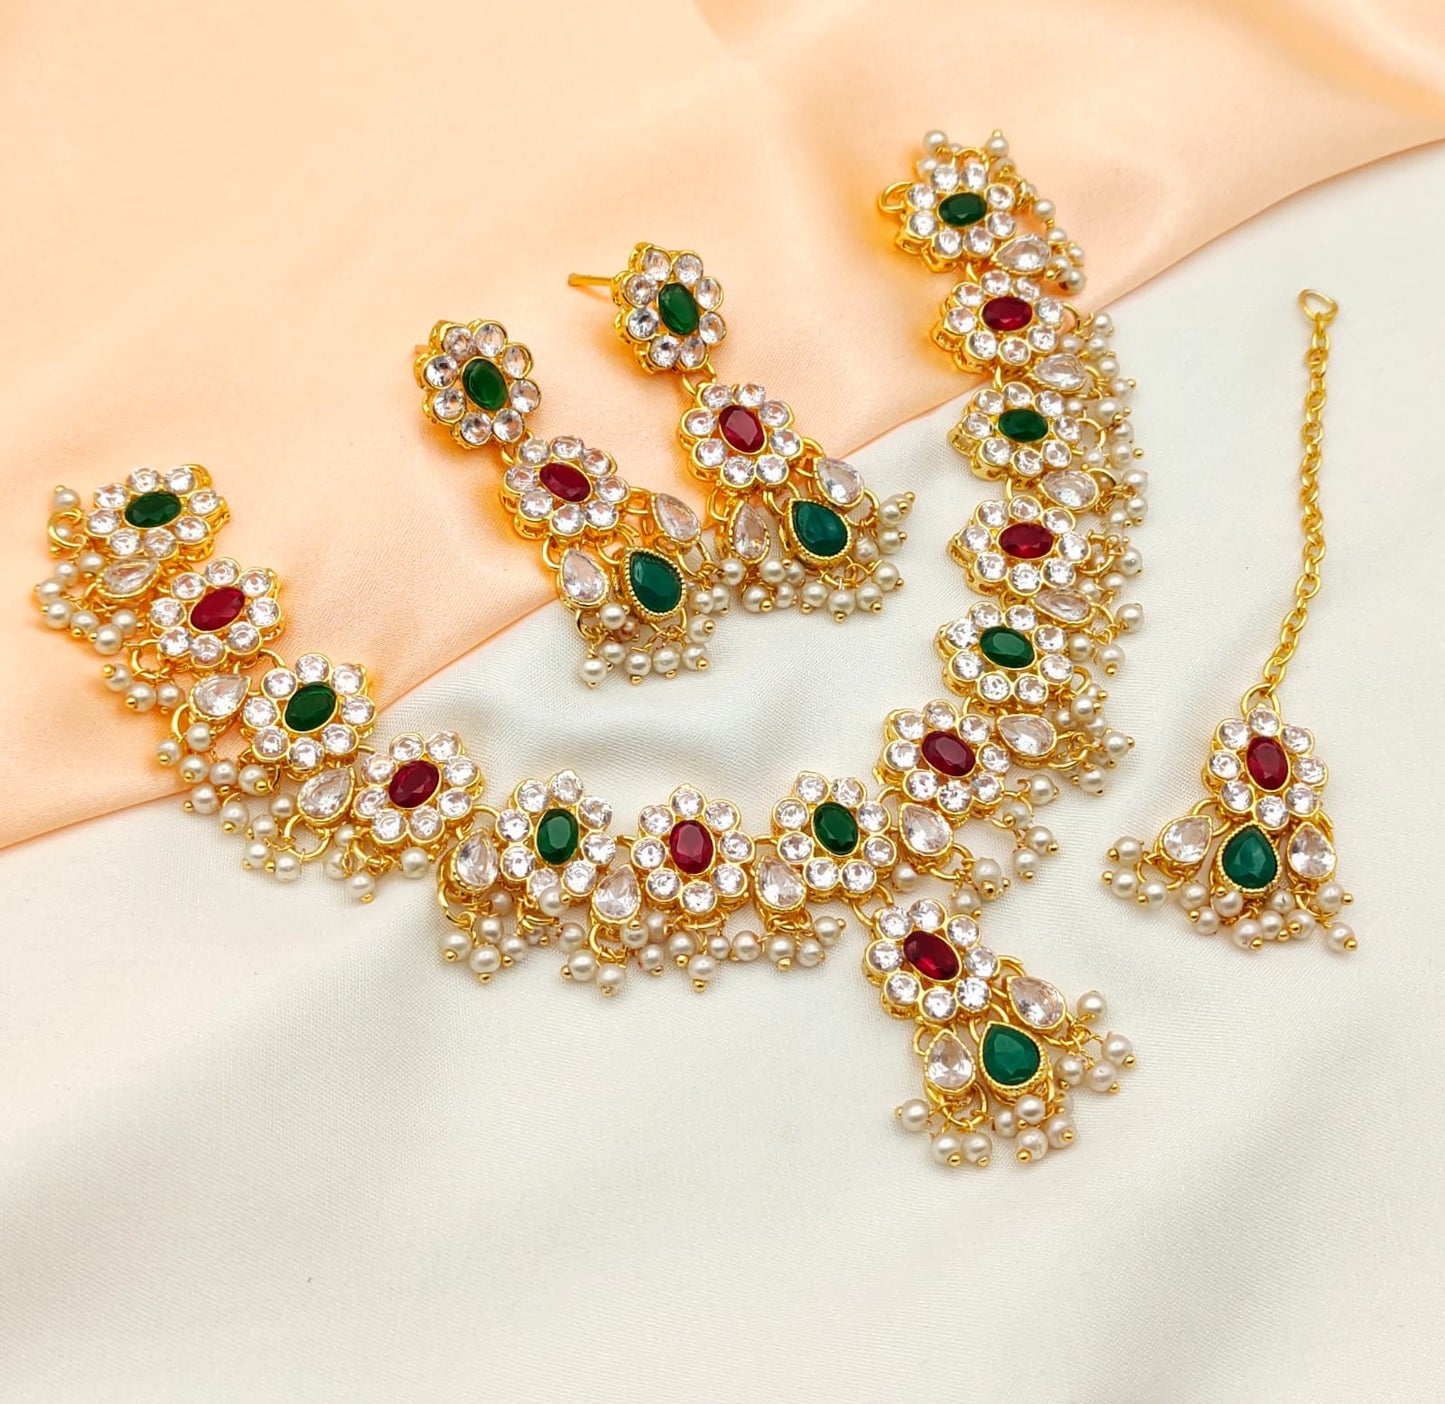 4PC Gold Jewelry Set Red/Green/White